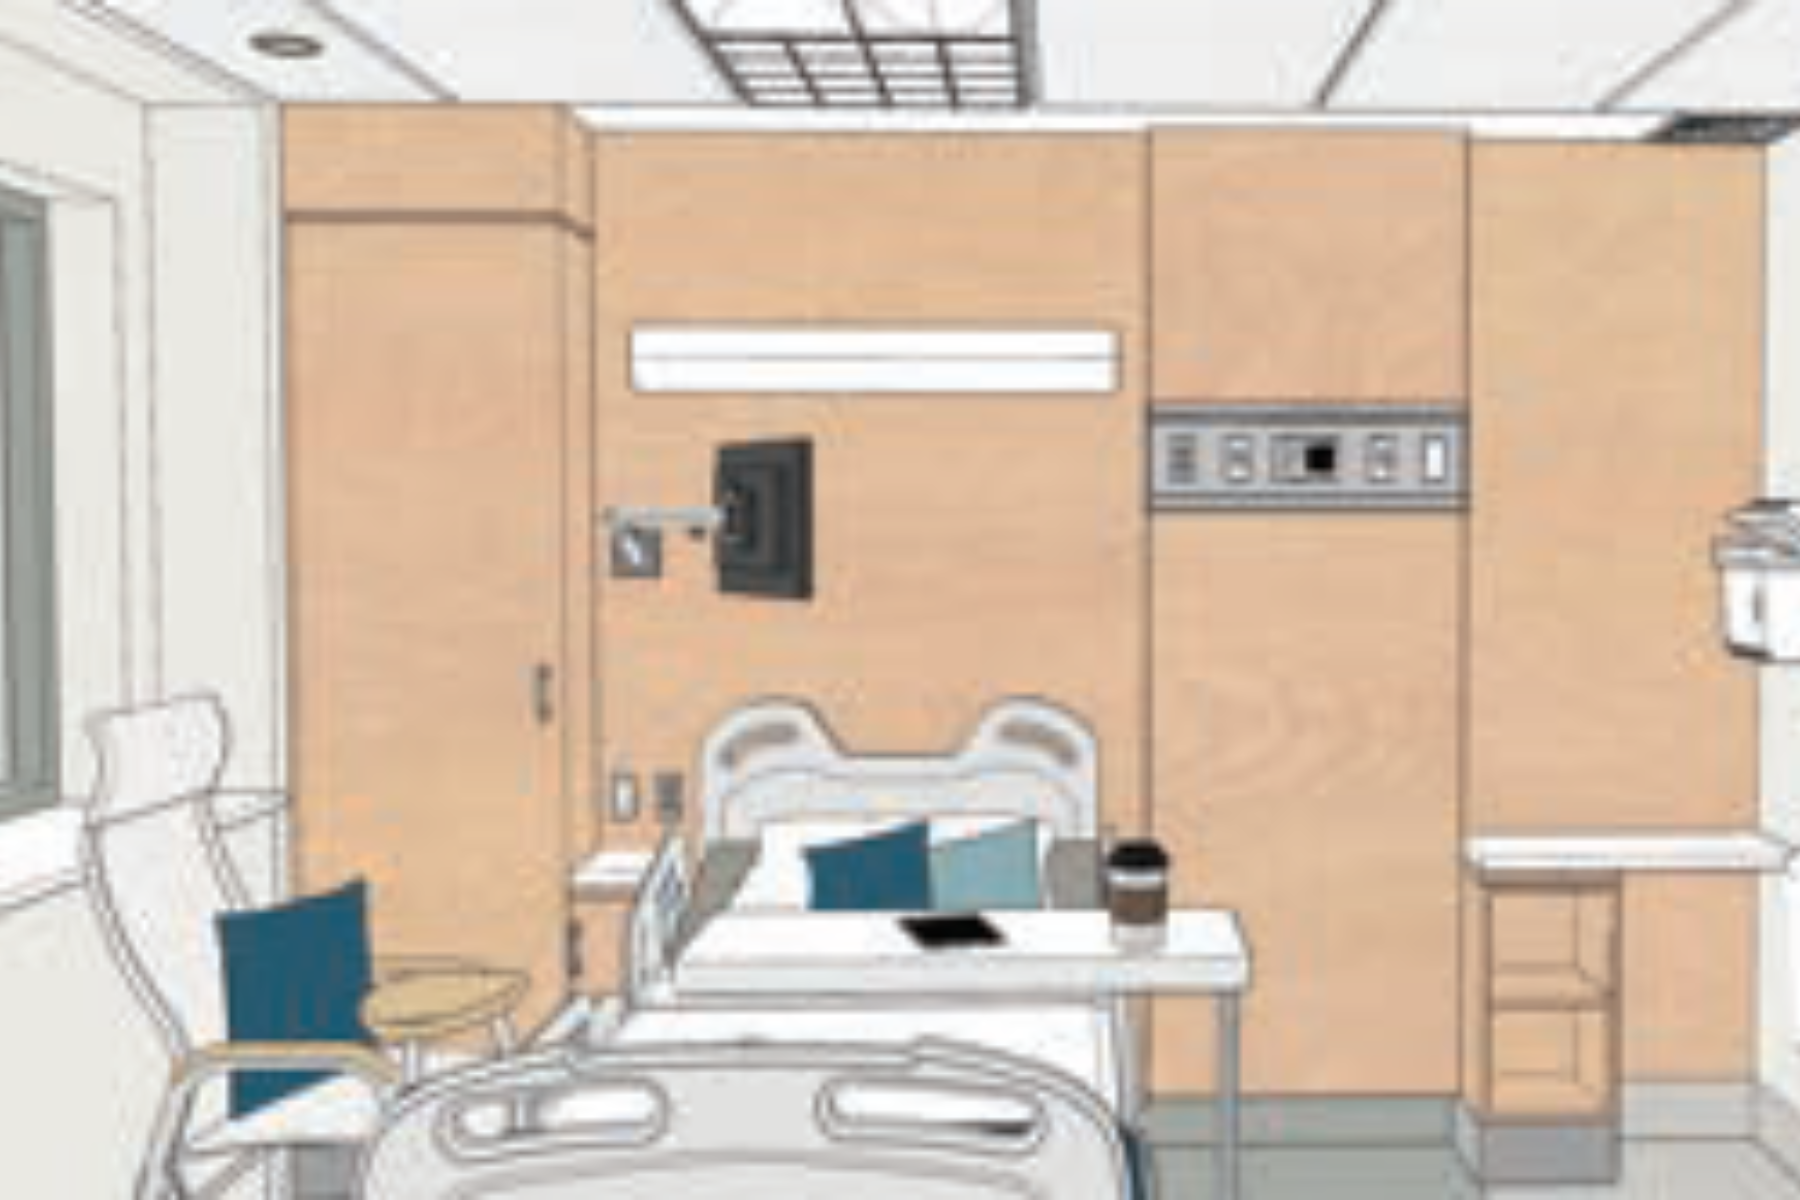 A rendering of a hospital room showing a bed, table, brown walls and accented cushions and pillows in blue.